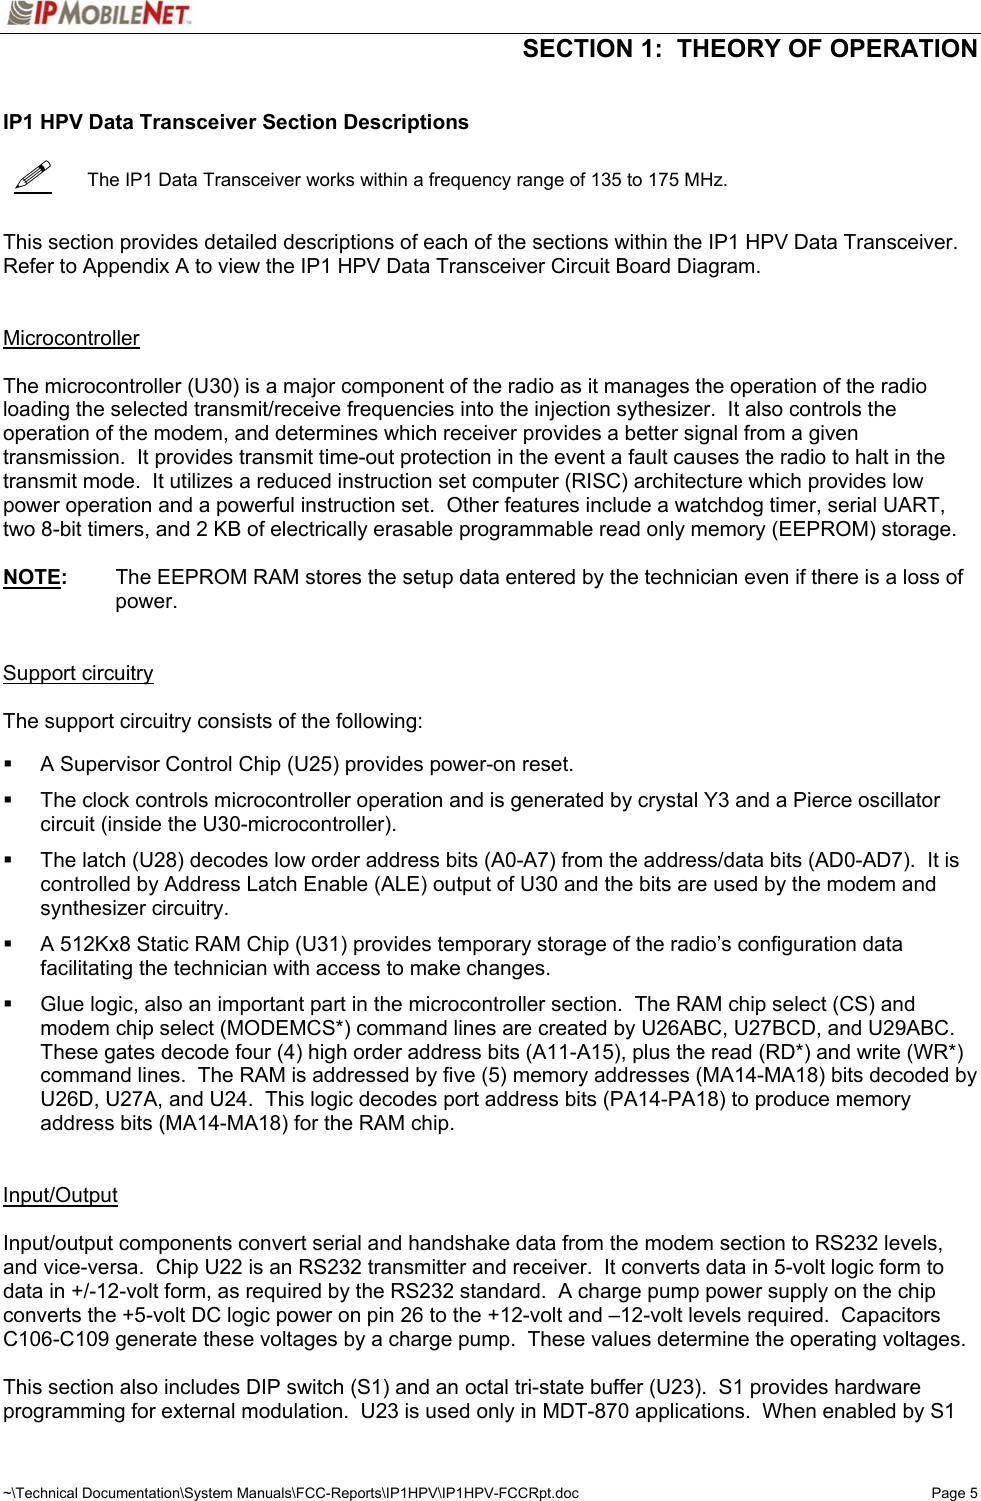  SECTION 1:  THEORY OF OPERATION  ~\Technical Documentation\System Manuals\FCC-Reports\IP1HPV\IP1HPV-FCCRpt.doc  Page 5    IP1 HPV Data Transceiver Section Descriptions     The IP1 Data Transceiver works within a frequency range of 135 to 175 MHz.   This section provides detailed descriptions of each of the sections within the IP1 HPV Data Transceiver.  Refer to Appendix A to view the IP1 HPV Data Transceiver Circuit Board Diagram.   Microcontroller   The microcontroller (U30) is a major component of the radio as it manages the operation of the radio loading the selected transmit/receive frequencies into the injection sythesizer.  It also controls the operation of the modem, and determines which receiver provides a better signal from a given transmission.  It provides transmit time-out protection in the event a fault causes the radio to halt in the transmit mode.  It utilizes a reduced instruction set computer (RISC) architecture which provides low power operation and a powerful instruction set.  Other features include a watchdog timer, serial UART, two 8-bit timers, and 2 KB of electrically erasable programmable read only memory (EEPROM) storage.  NOTE:  The EEPROM RAM stores the setup data entered by the technician even if there is a loss of power.   Support circuitry  The support circuitry consists of the following:      A Supervisor Control Chip (U25) provides power-on reset.    The clock controls microcontroller operation and is generated by crystal Y3 and a Pierce oscillator circuit (inside the U30-microcontroller).    The latch (U28) decodes low order address bits (A0-A7) from the address/data bits (AD0-AD7).  It is controlled by Address Latch Enable (ALE) output of U30 and the bits are used by the modem and synthesizer circuitry.    A 512Kx8 Static RAM Chip (U31) provides temporary storage of the radio’s configuration data facilitating the technician with access to make changes.    Glue logic, also an important part in the microcontroller section.  The RAM chip select (CS) and modem chip select (MODEMCS*) command lines are created by U26ABC, U27BCD, and U29ABC.  These gates decode four (4) high order address bits (A11-A15), plus the read (RD*) and write (WR*) command lines.  The RAM is addressed by five (5) memory addresses (MA14-MA18) bits decoded by U26D, U27A, and U24.  This logic decodes port address bits (PA14-PA18) to produce memory address bits (MA14-MA18) for the RAM chip.   Input/Output   Input/output components convert serial and handshake data from the modem section to RS232 levels, and vice-versa.  Chip U22 is an RS232 transmitter and receiver.  It converts data in 5-volt logic form to data in +/-12-volt form, as required by the RS232 standard.  A charge pump power supply on the chip converts the +5-volt DC logic power on pin 26 to the +12-volt and –12-volt levels required.  Capacitors C106-C109 generate these voltages by a charge pump.  These values determine the operating voltages.  This section also includes DIP switch (S1) and an octal tri-state buffer (U23).  S1 provides hardware programming for external modulation.  U23 is used only in MDT-870 applications.  When enabled by S1 